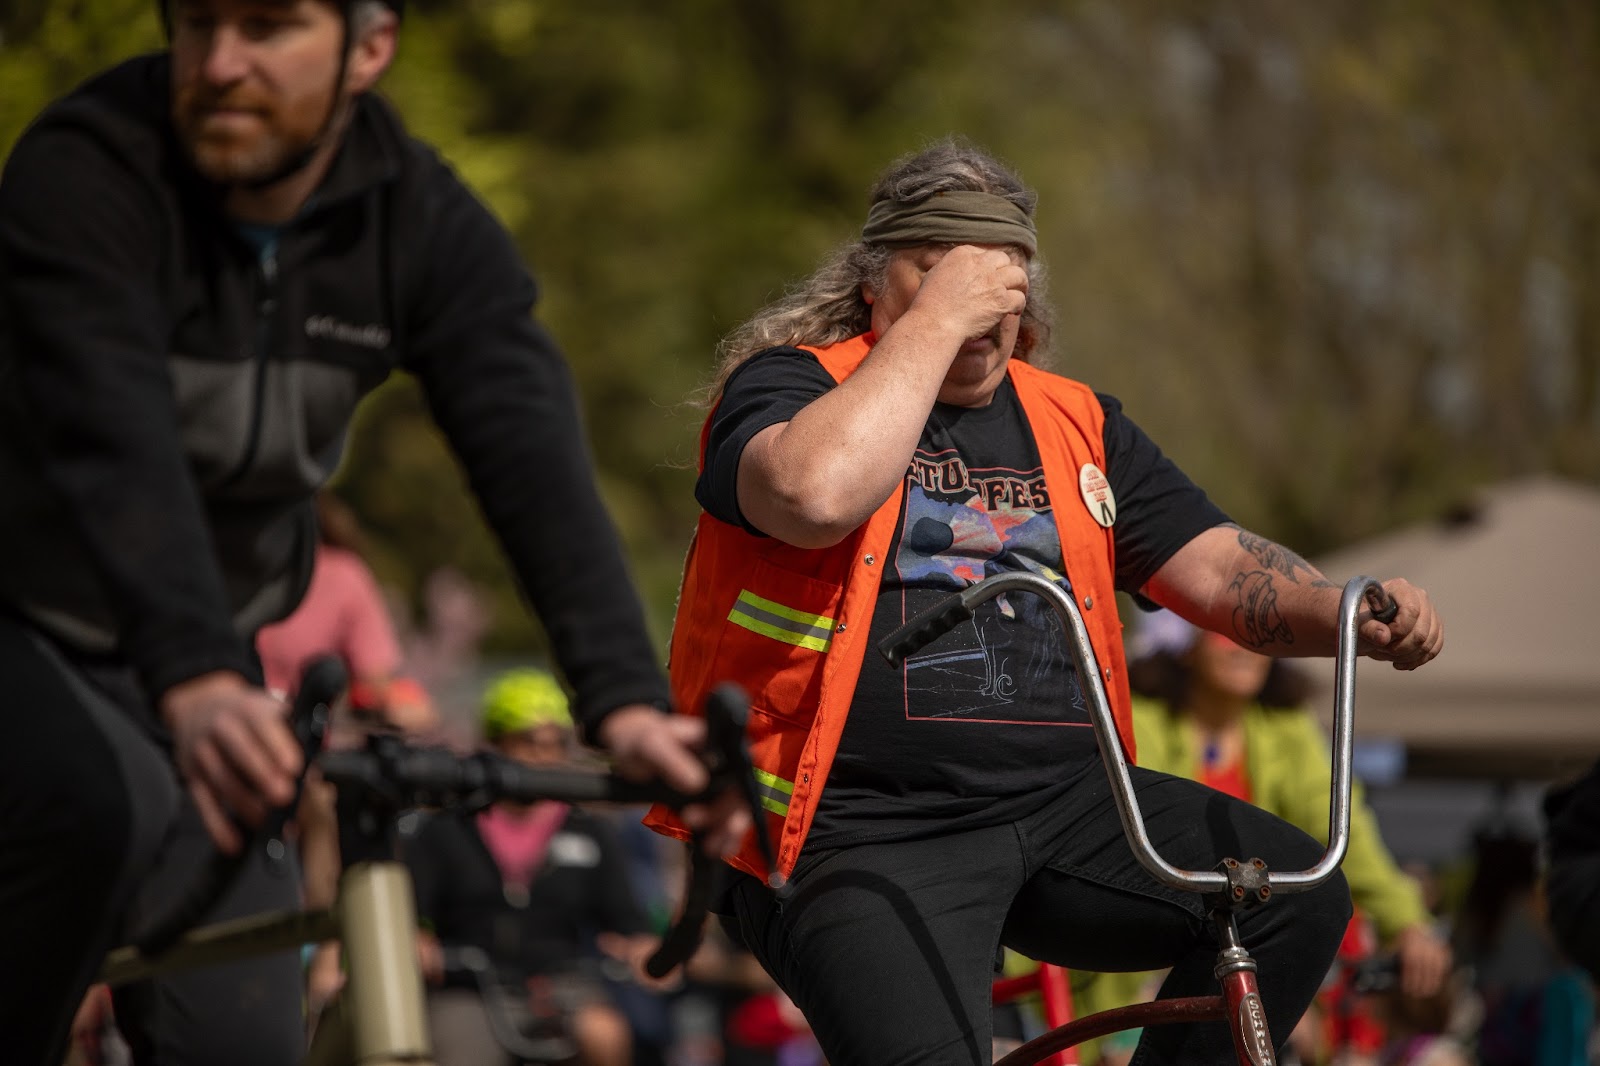 A tattooed man in black jeans and an orange safety vest riding a bike with the old-timey cruiser handlebars in the Ladd's 500 relay in Portland.